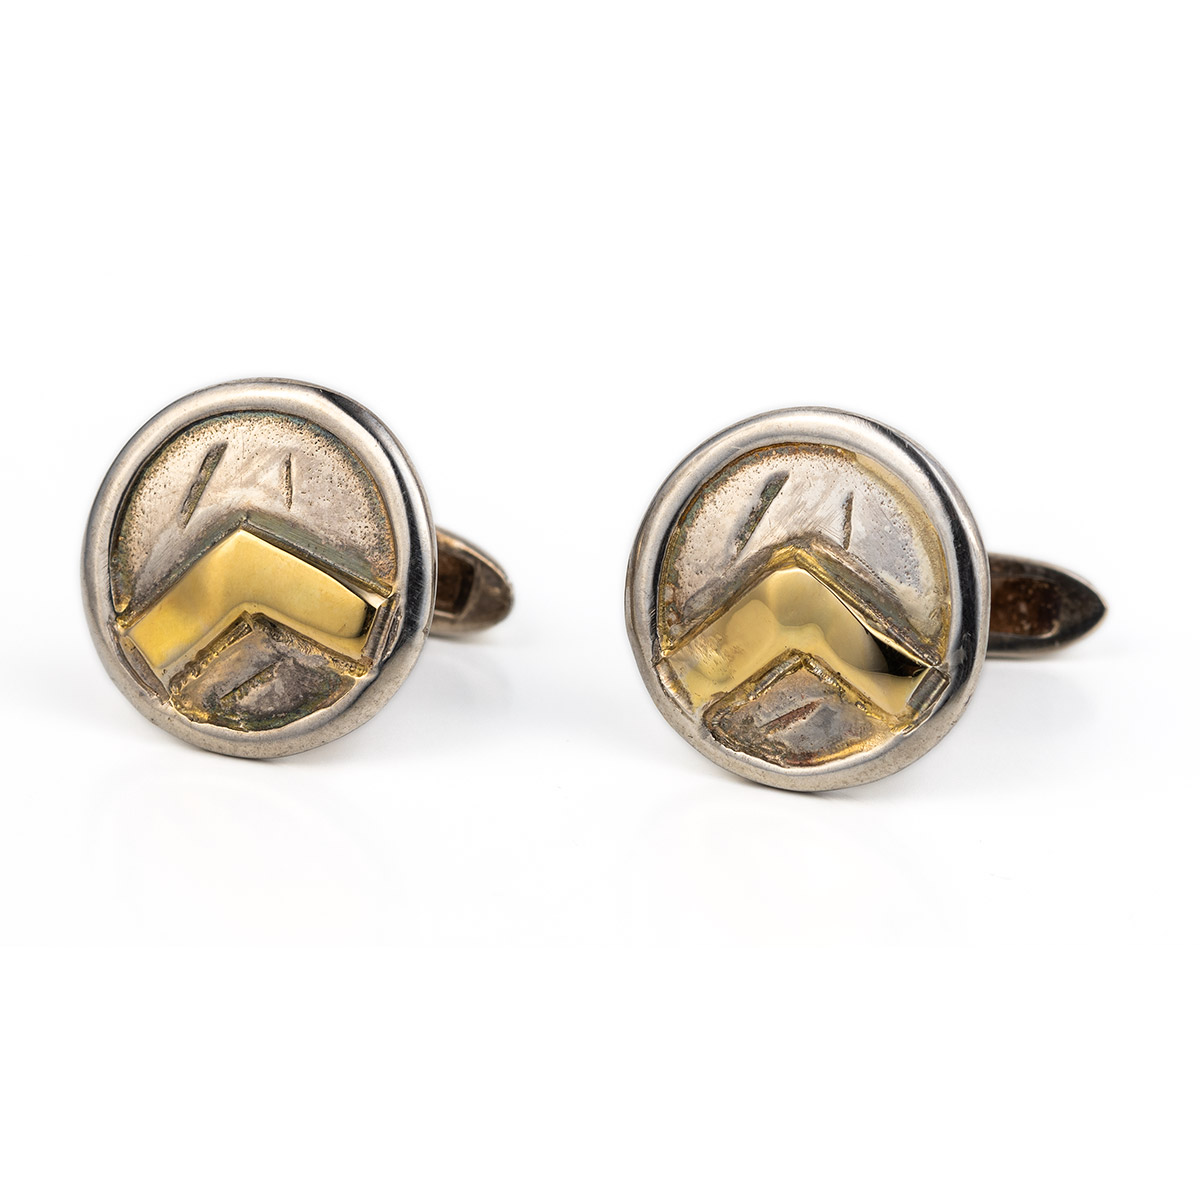 Spartan Shield Cufflinks - 14k Gold and Sterling Silver - GREEK ROOTS